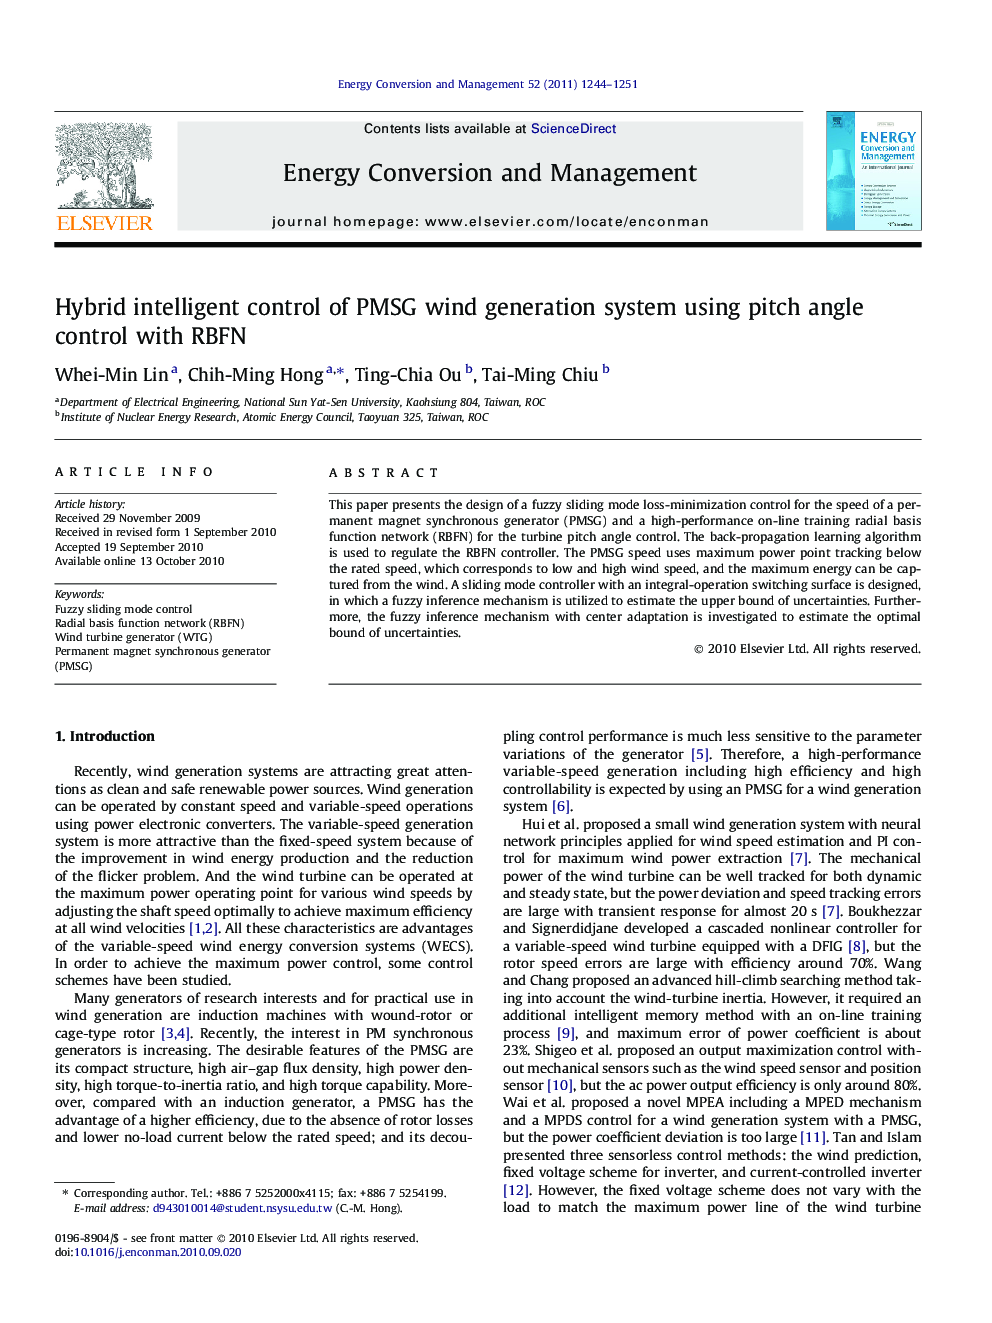 Hybrid intelligent control of PMSG wind generation system using pitch angle control with RBFN